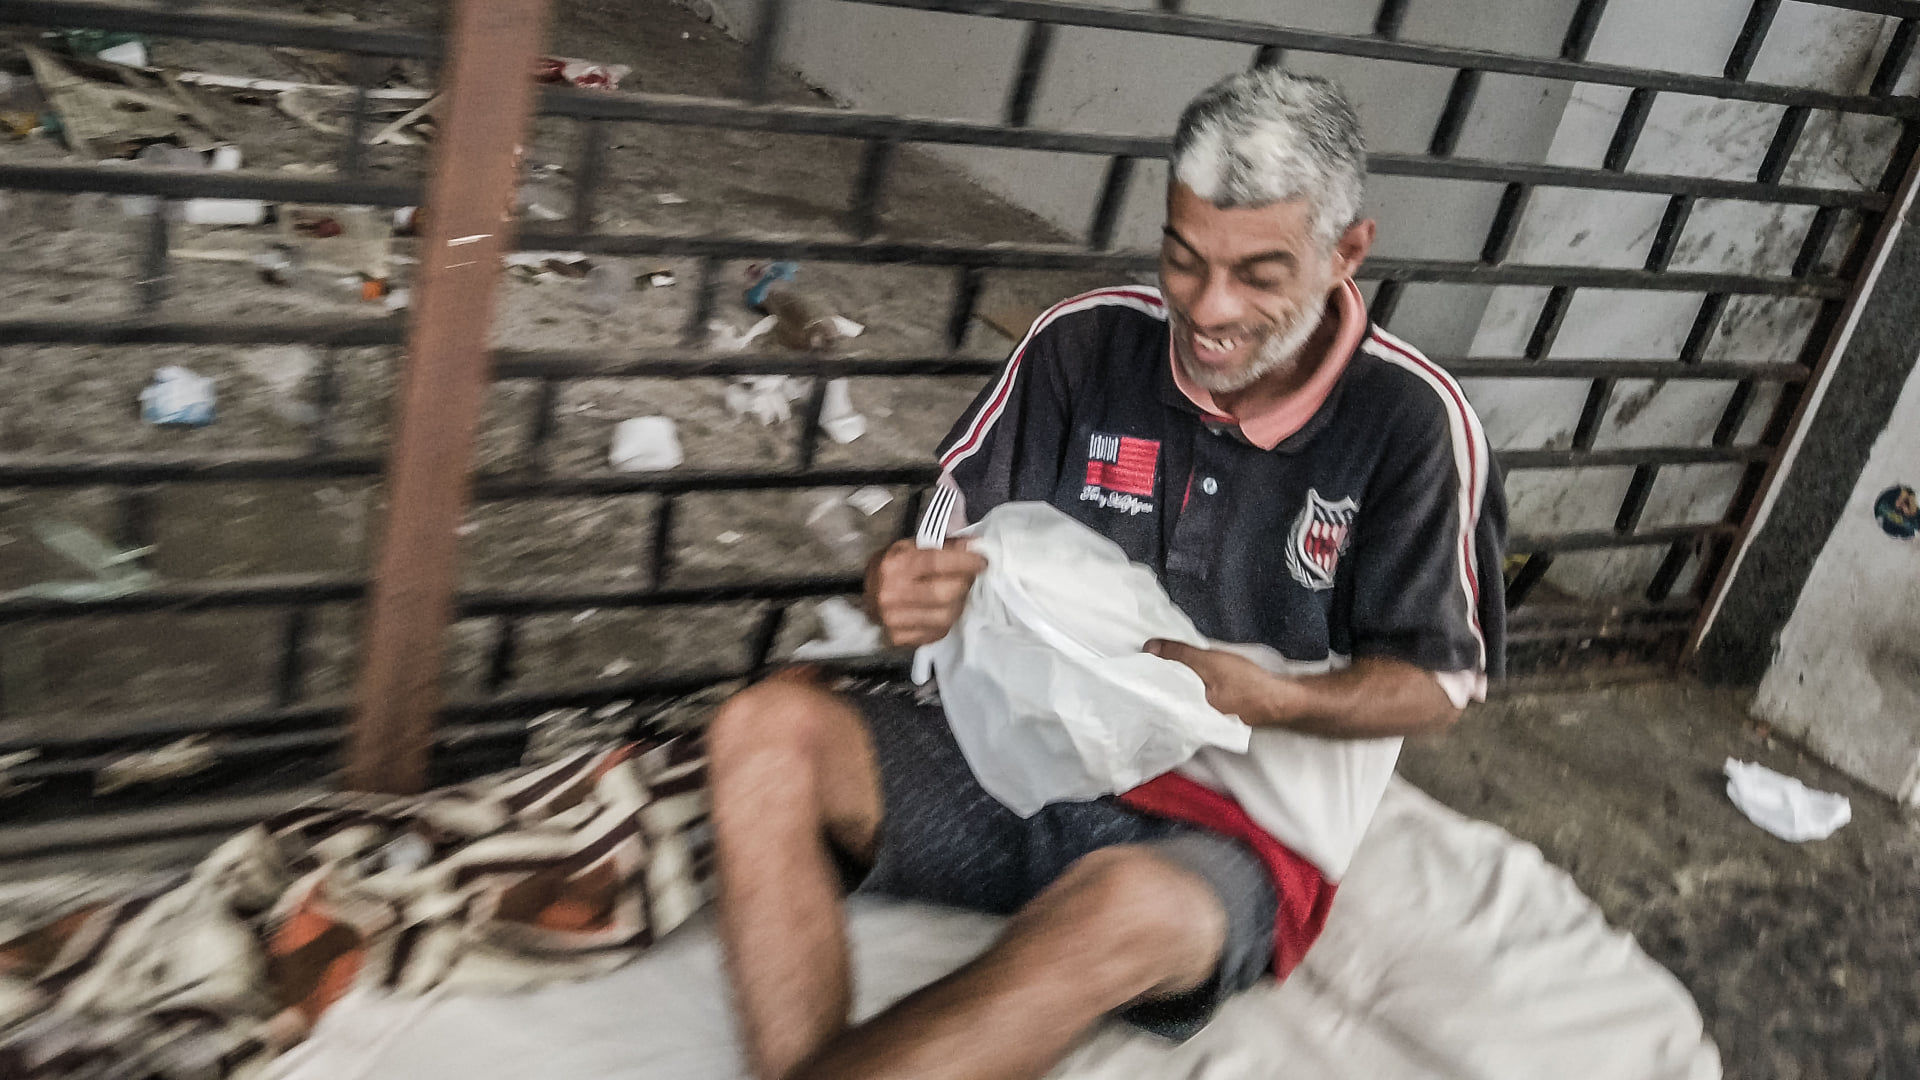 Miroslaw Wawak supporting the Homeless of Rio during COVID-19 pandemic | Christmas 2020